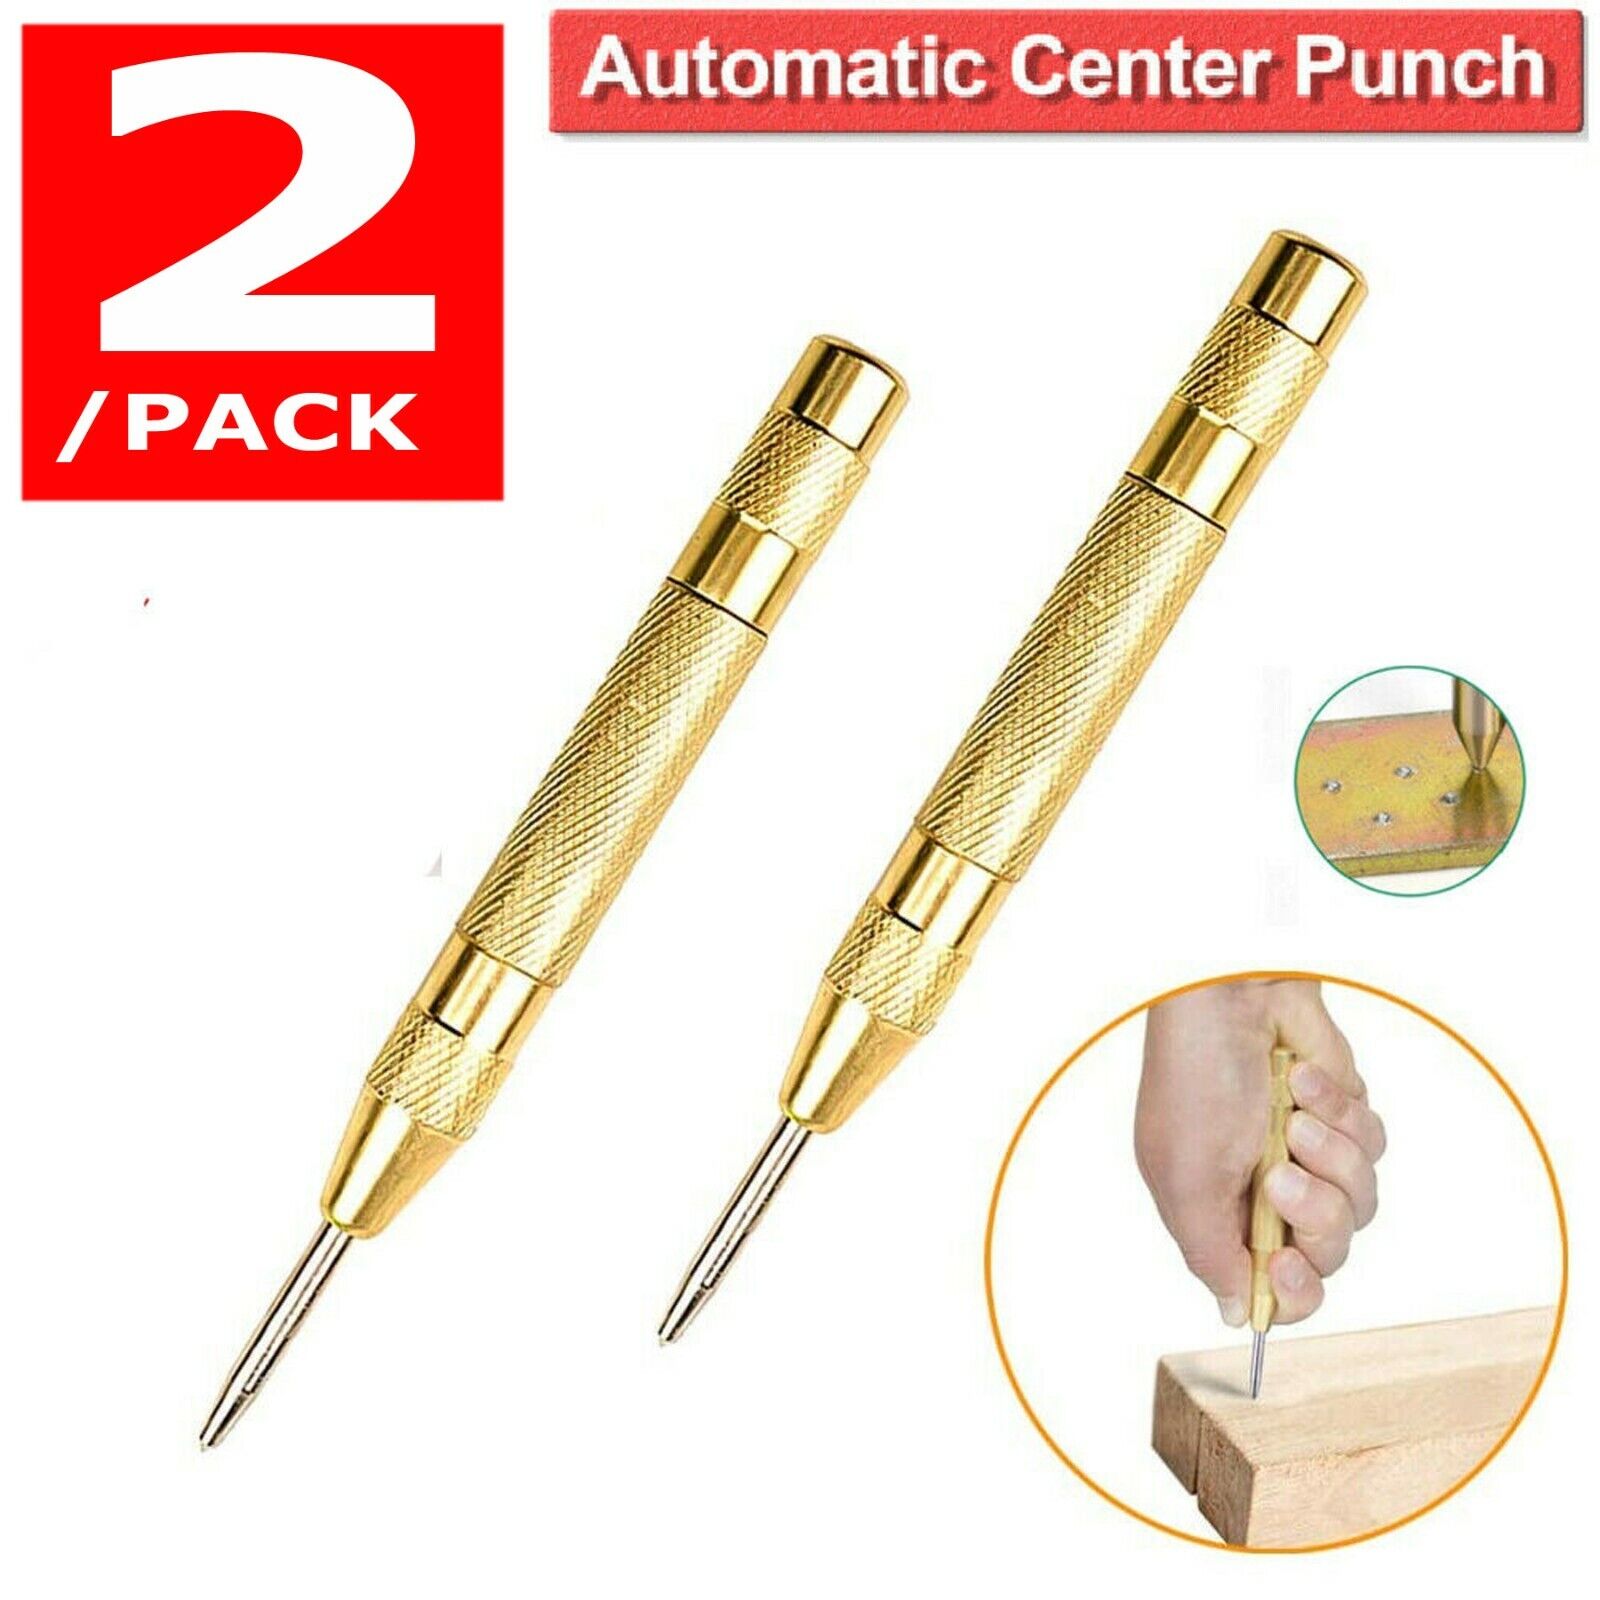 Automatic CENTER PUNCH Tool Adjustable Spring Loaded Super Strong